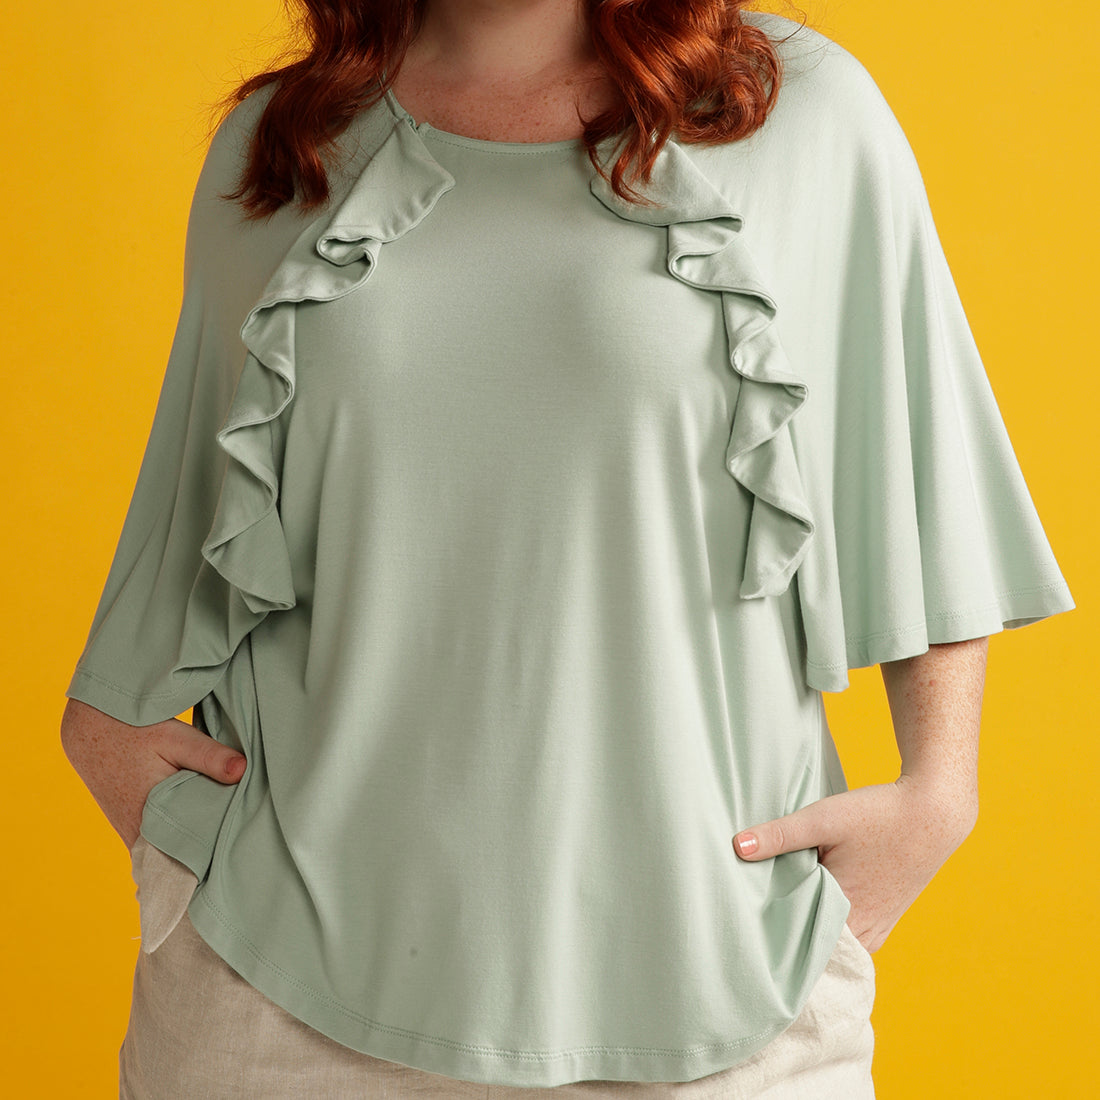 Close up plus sized woman in mint green adaptive top with ruffle detail